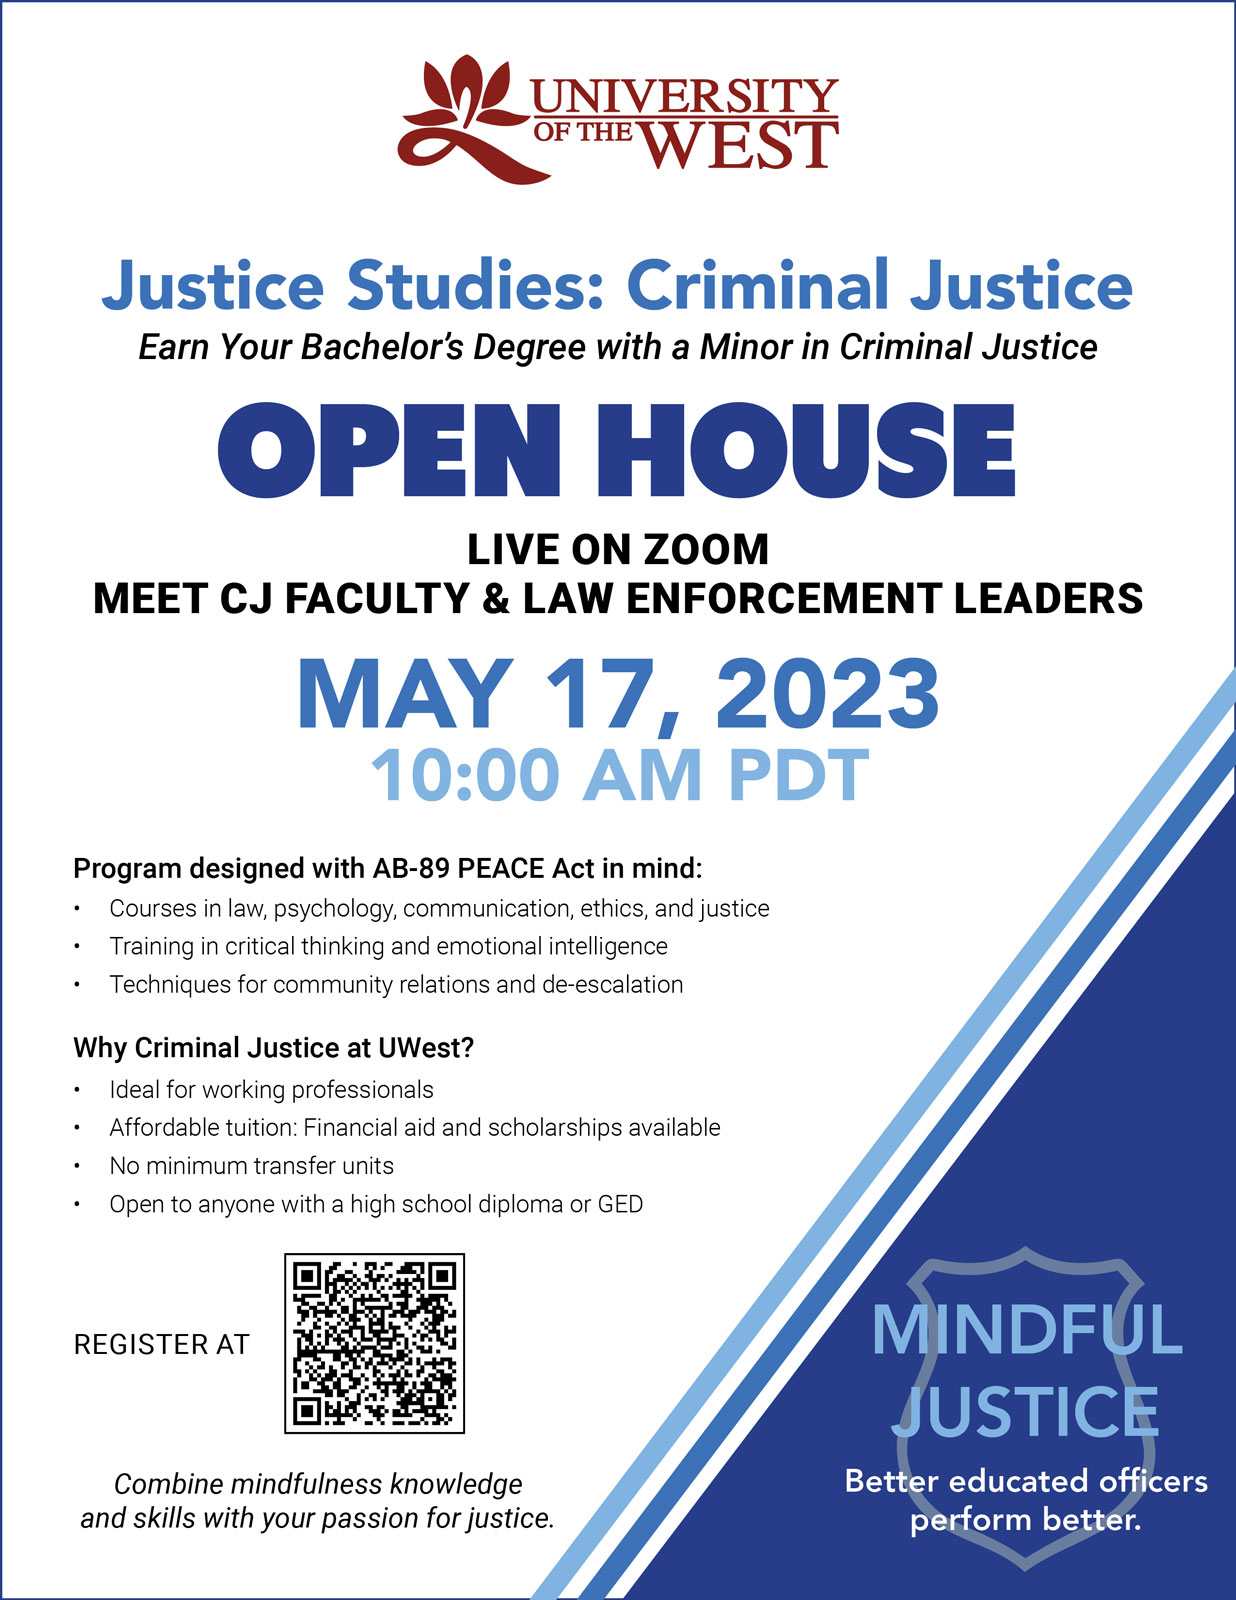 University of the West Justice Studies Criminal Justice Open House